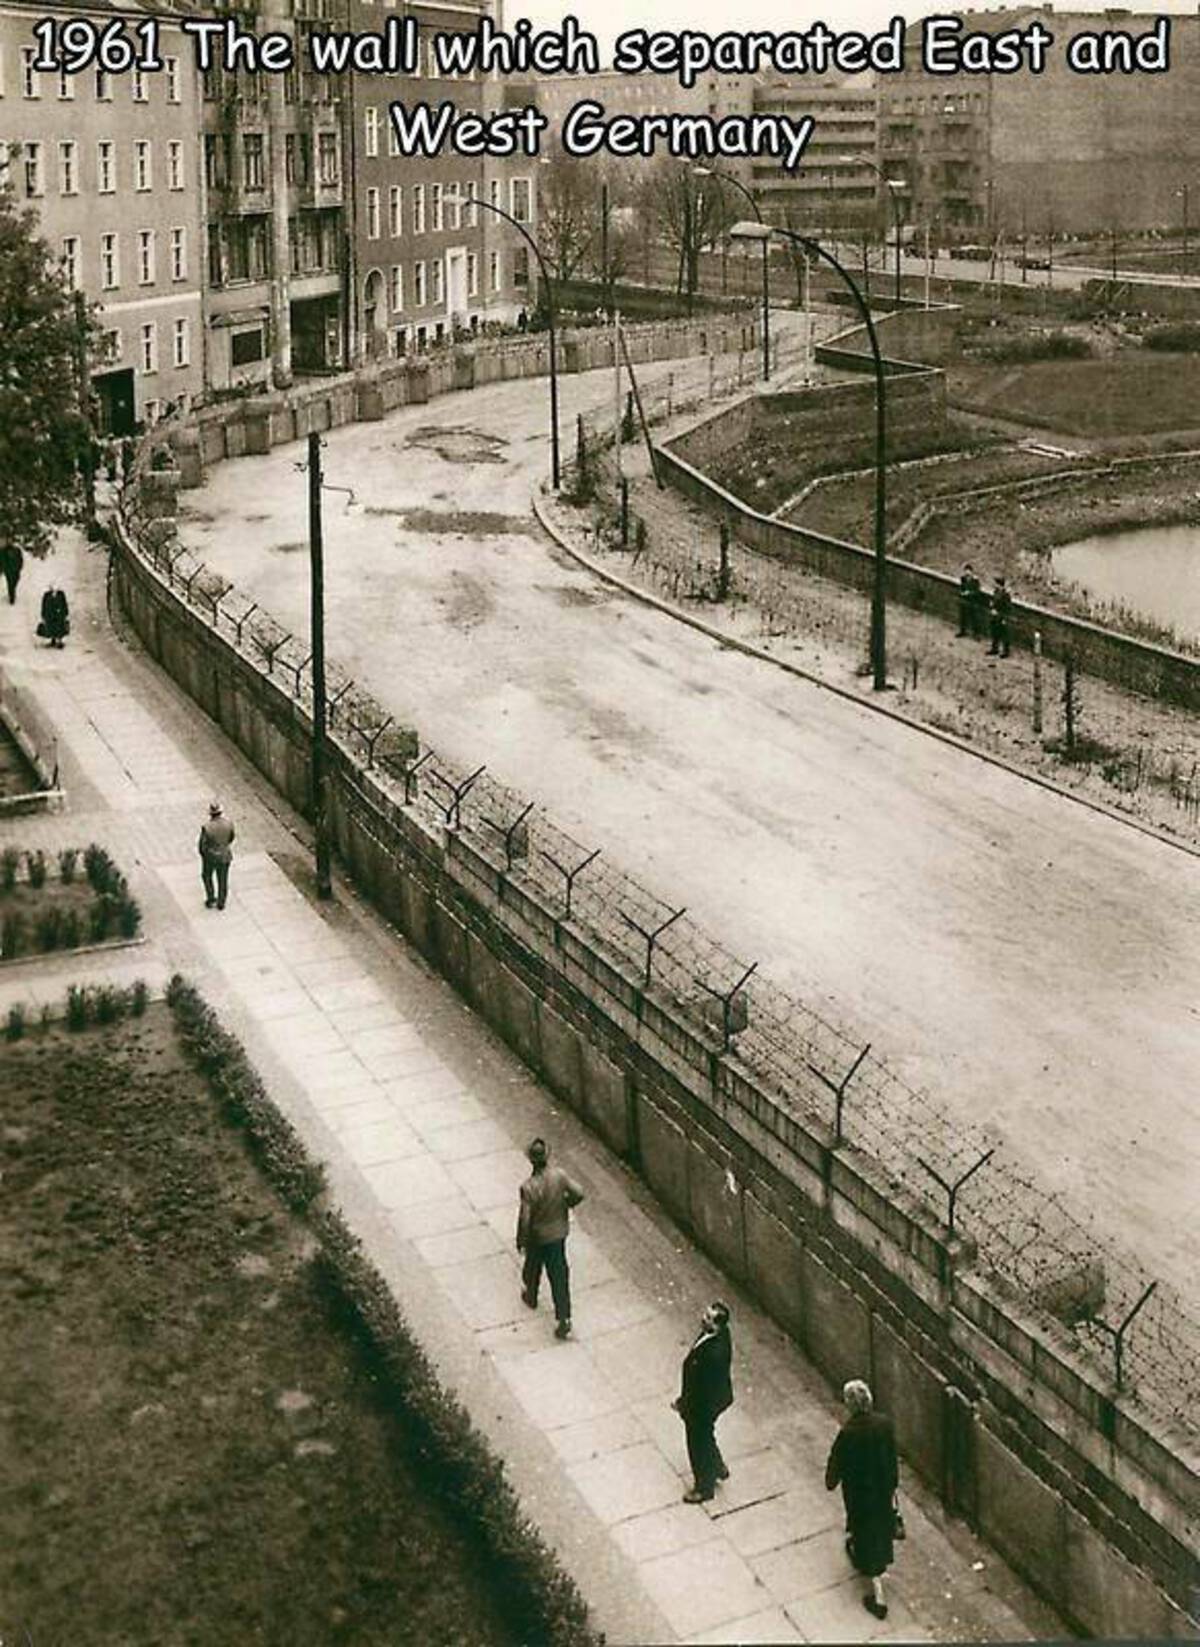 intersection - 1961. The wall which separated East and West Germany